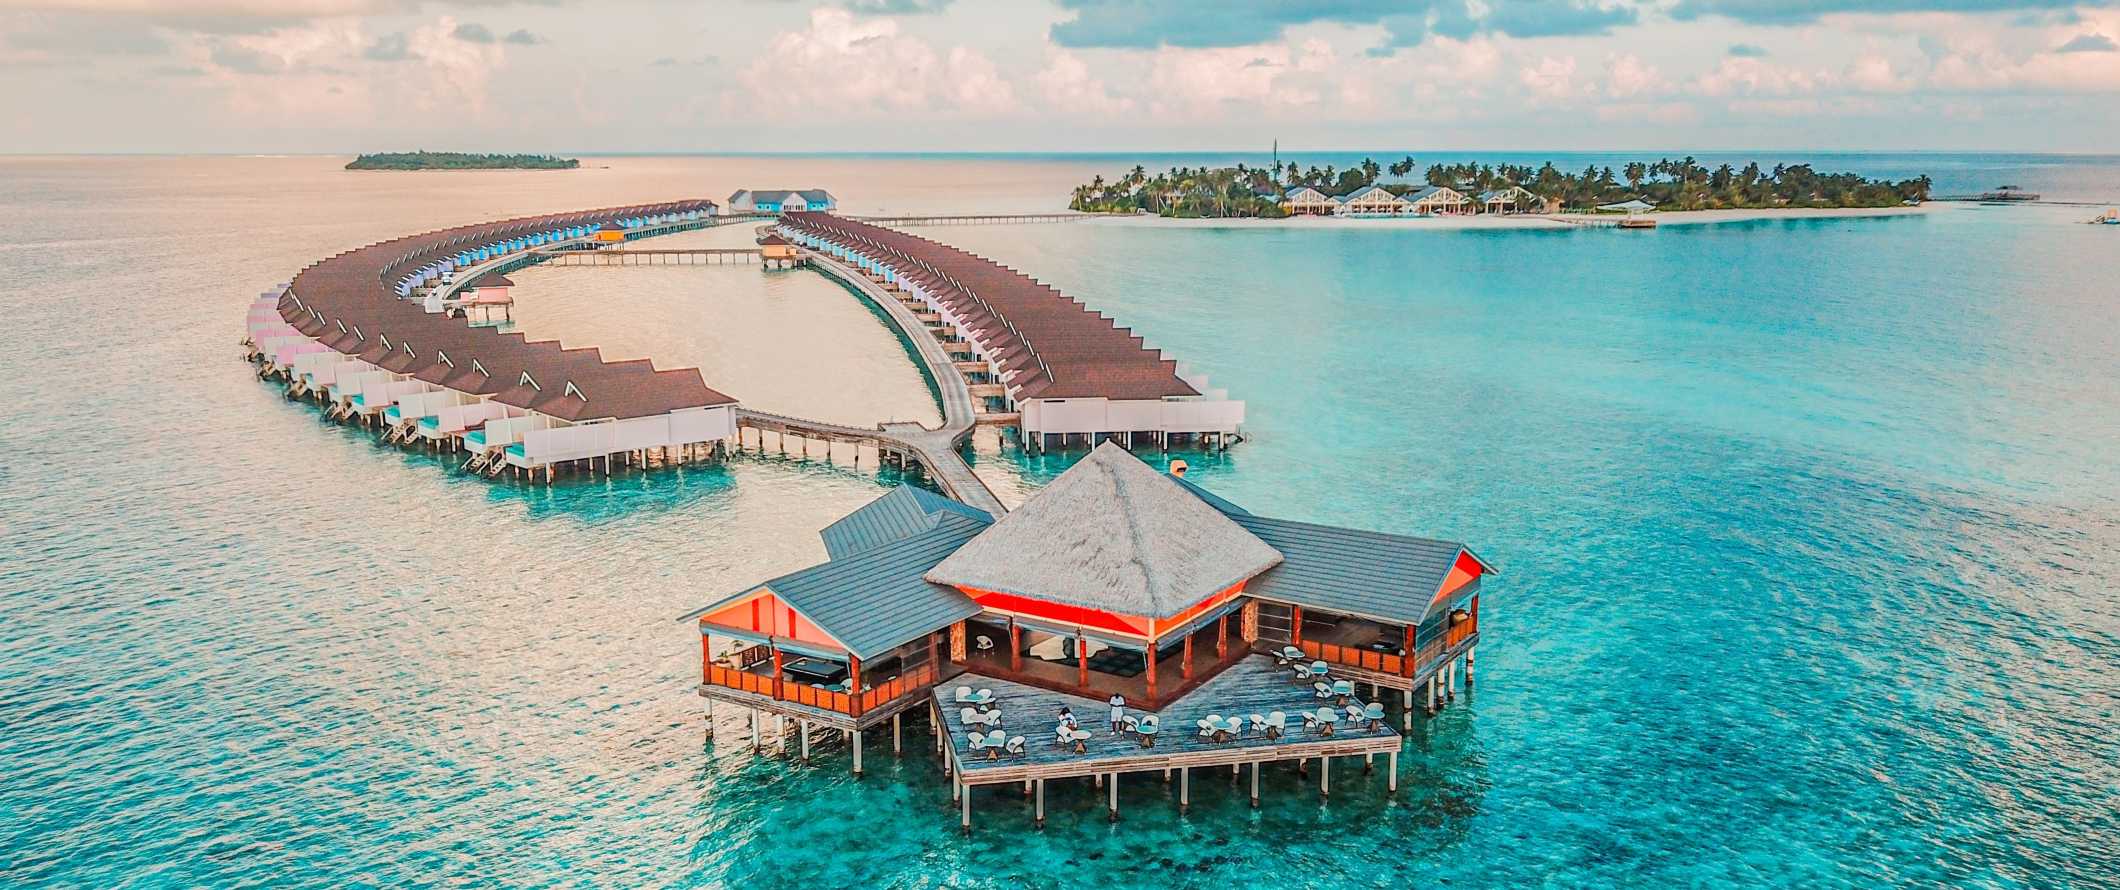 Connected thatched over-water bungalows at a resort in the Maldives